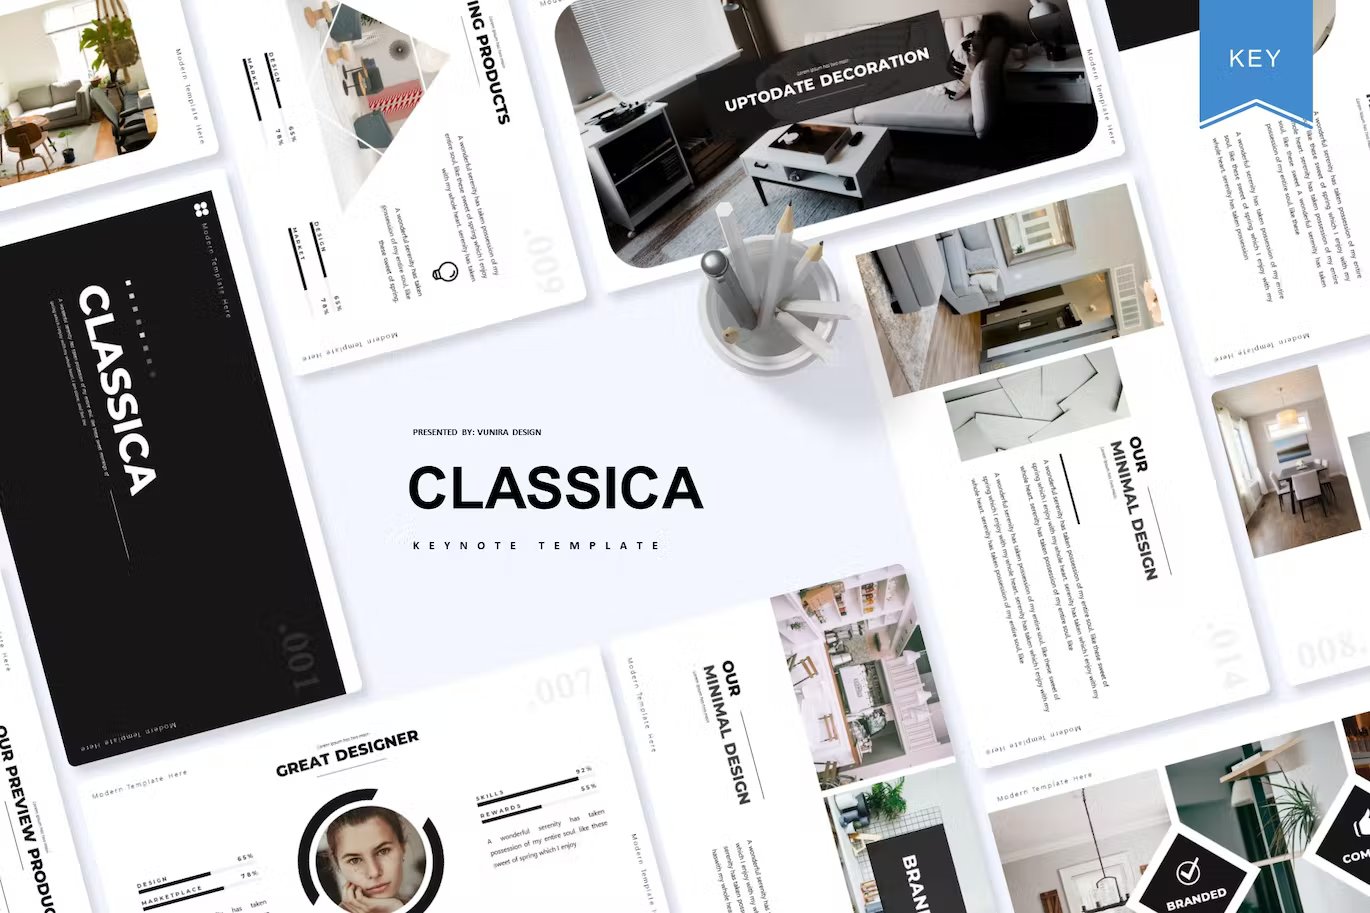 Black lettering "Classica Keynote Template" and different templates on a gray background.